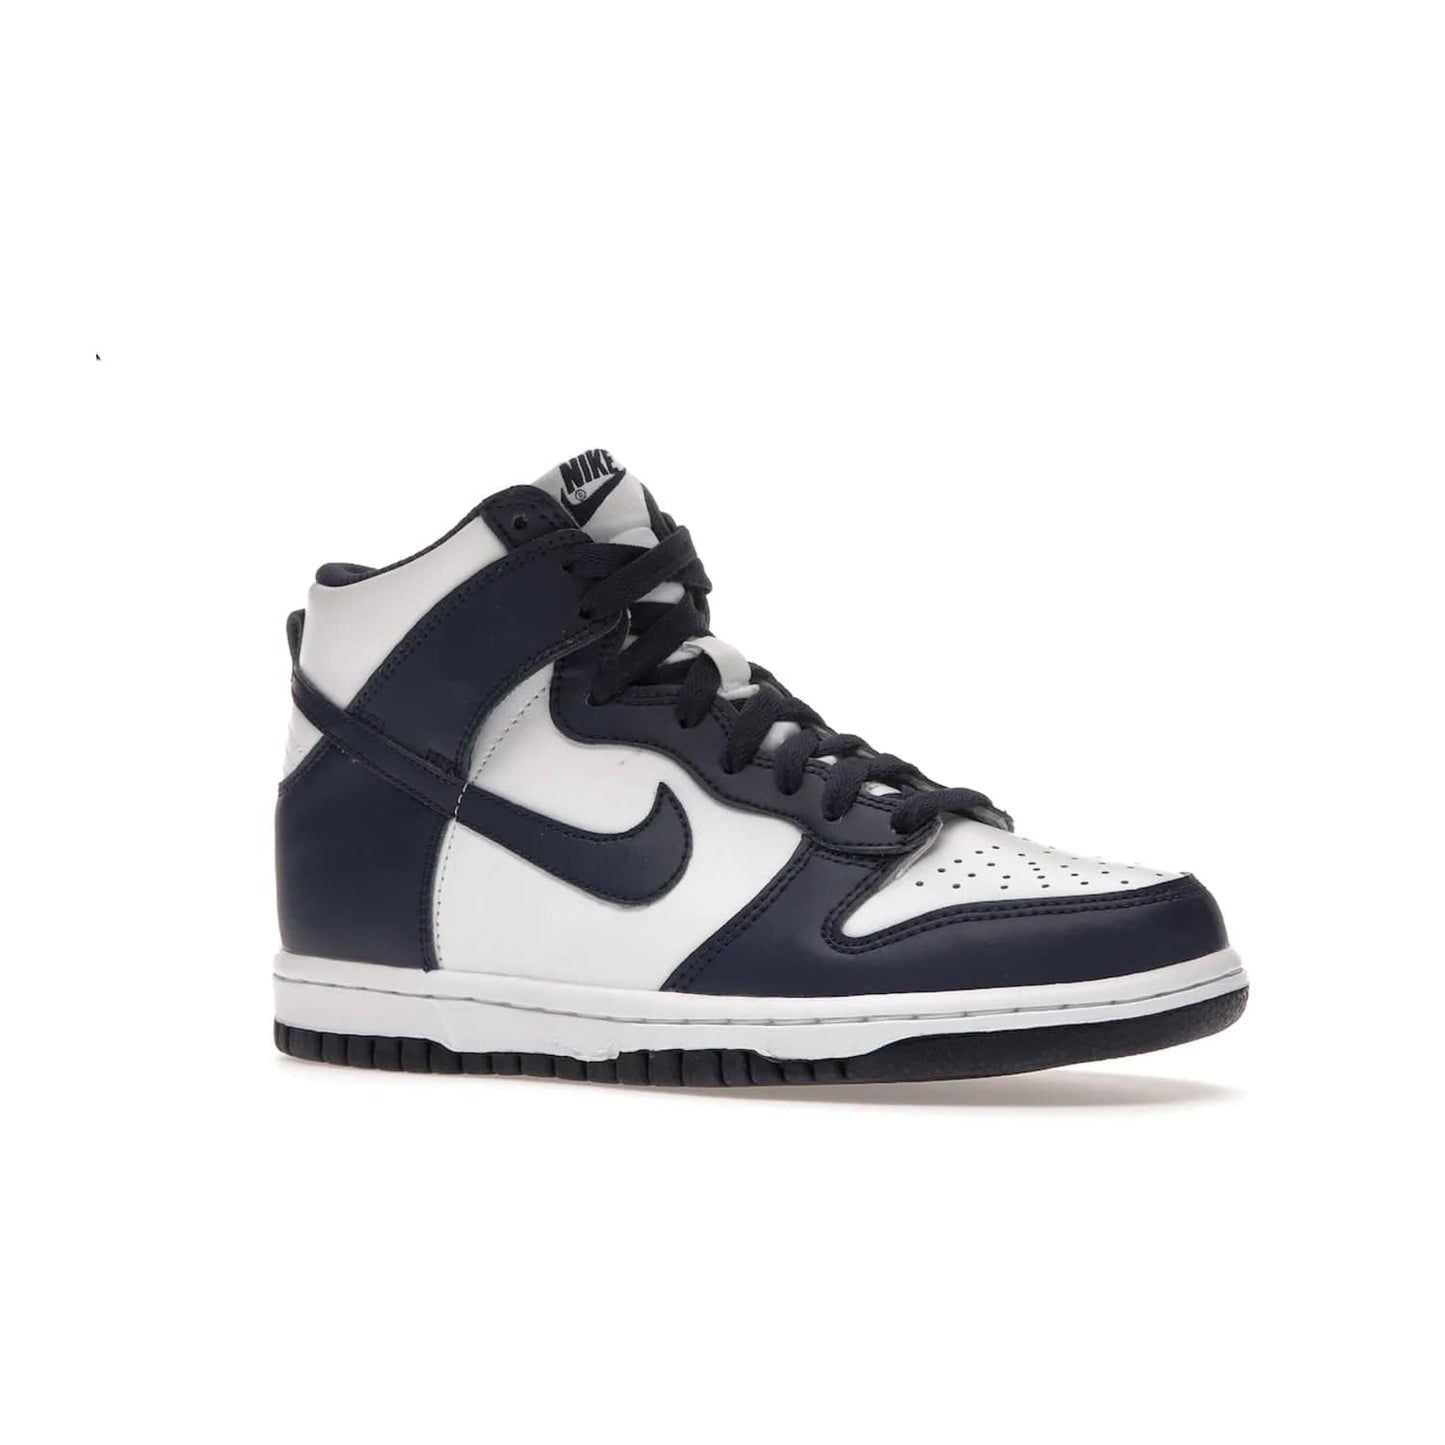 Nike Dunk High Championship Navy (GS) - Image 4 - Only at www.BallersClubKickz.com - Nike Dunk High Championship Navy GS: classic leather, suede, synthetic upper, chunky midsole, rubber herringbone sole. White base overlaid with Midnight Navy for a stylish finish. Padded high-cut collar and signature Nike swoosh design. Step out in these shoes and make a statement. Comfort and style at its finest.